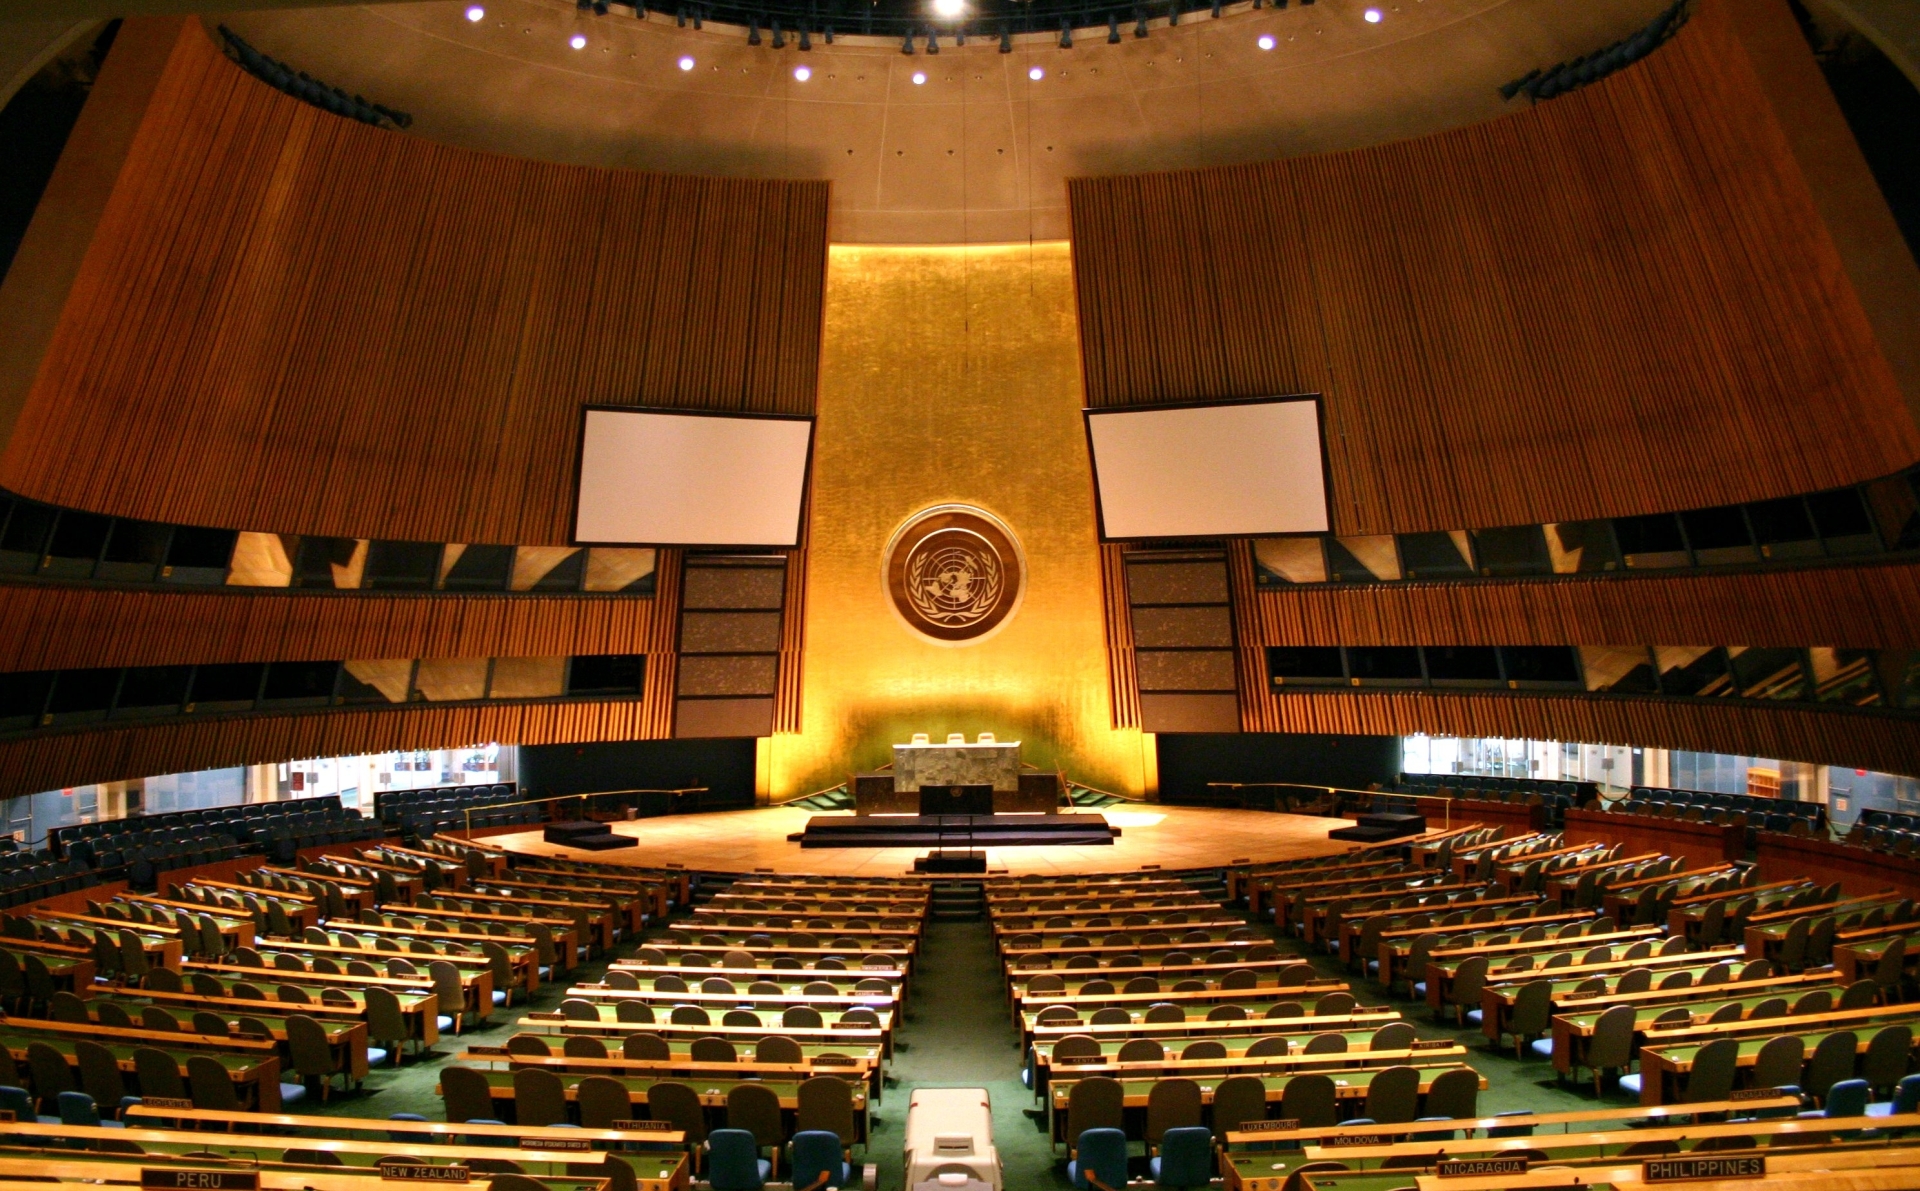 UN General Assembly hall